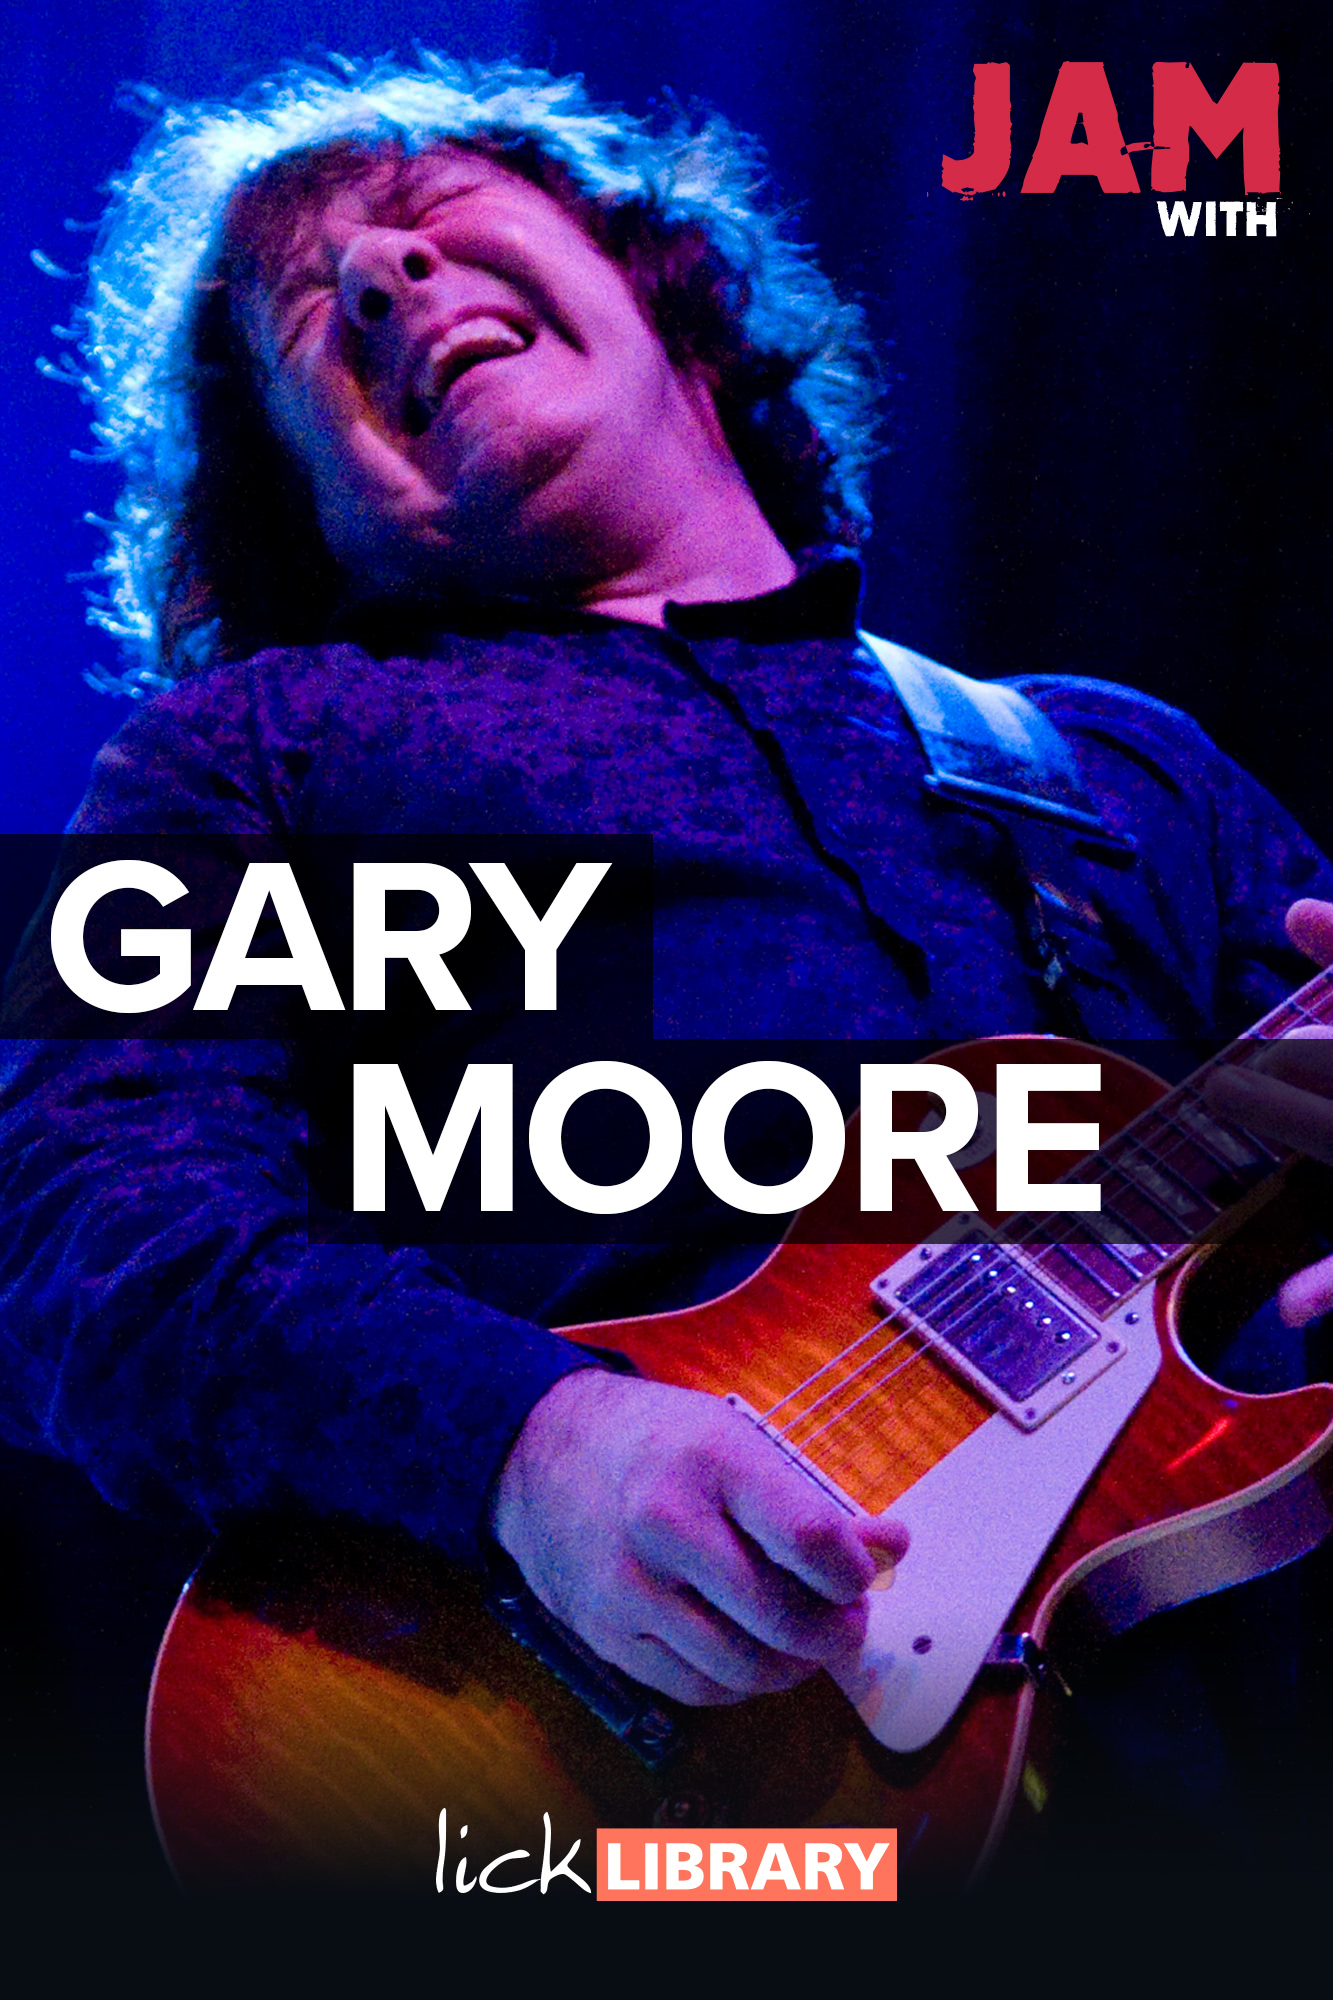 Learn Jam With Gary Moore with Jamie Humphries LickLibrary